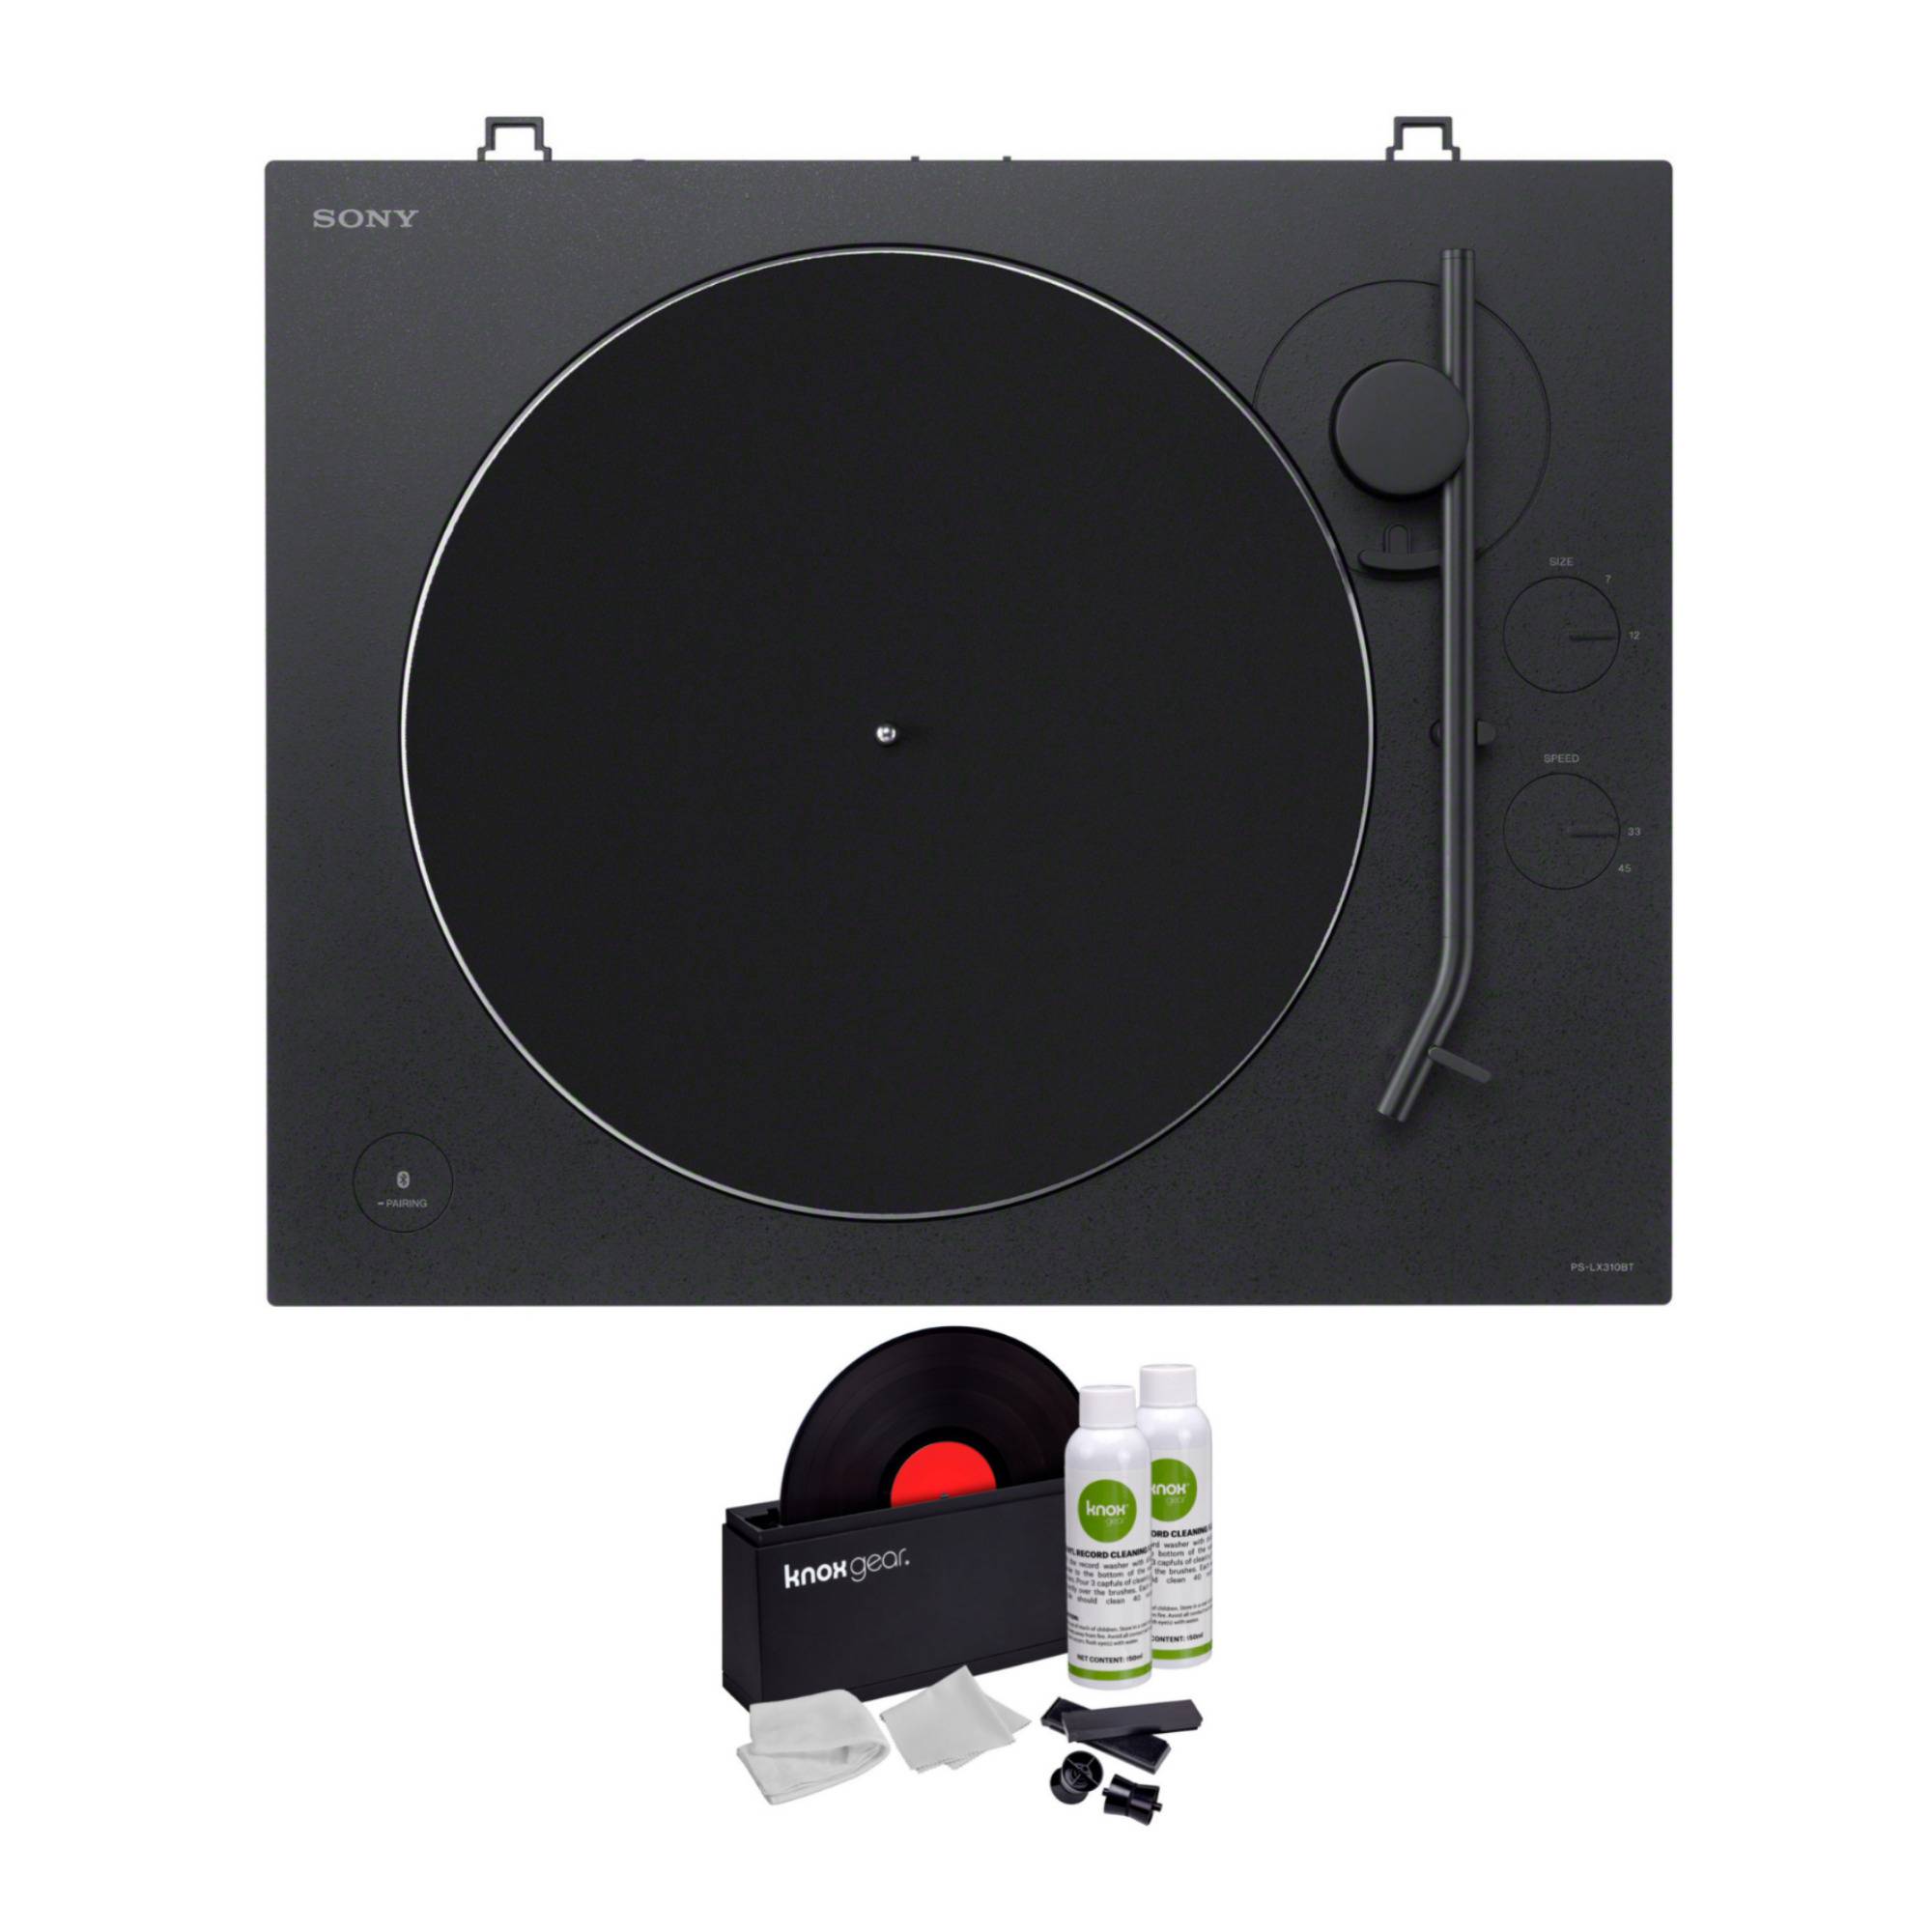 Sony PS-LX310BT Wireless Turntable with Vinyl Record Cleaner Kit Bundle